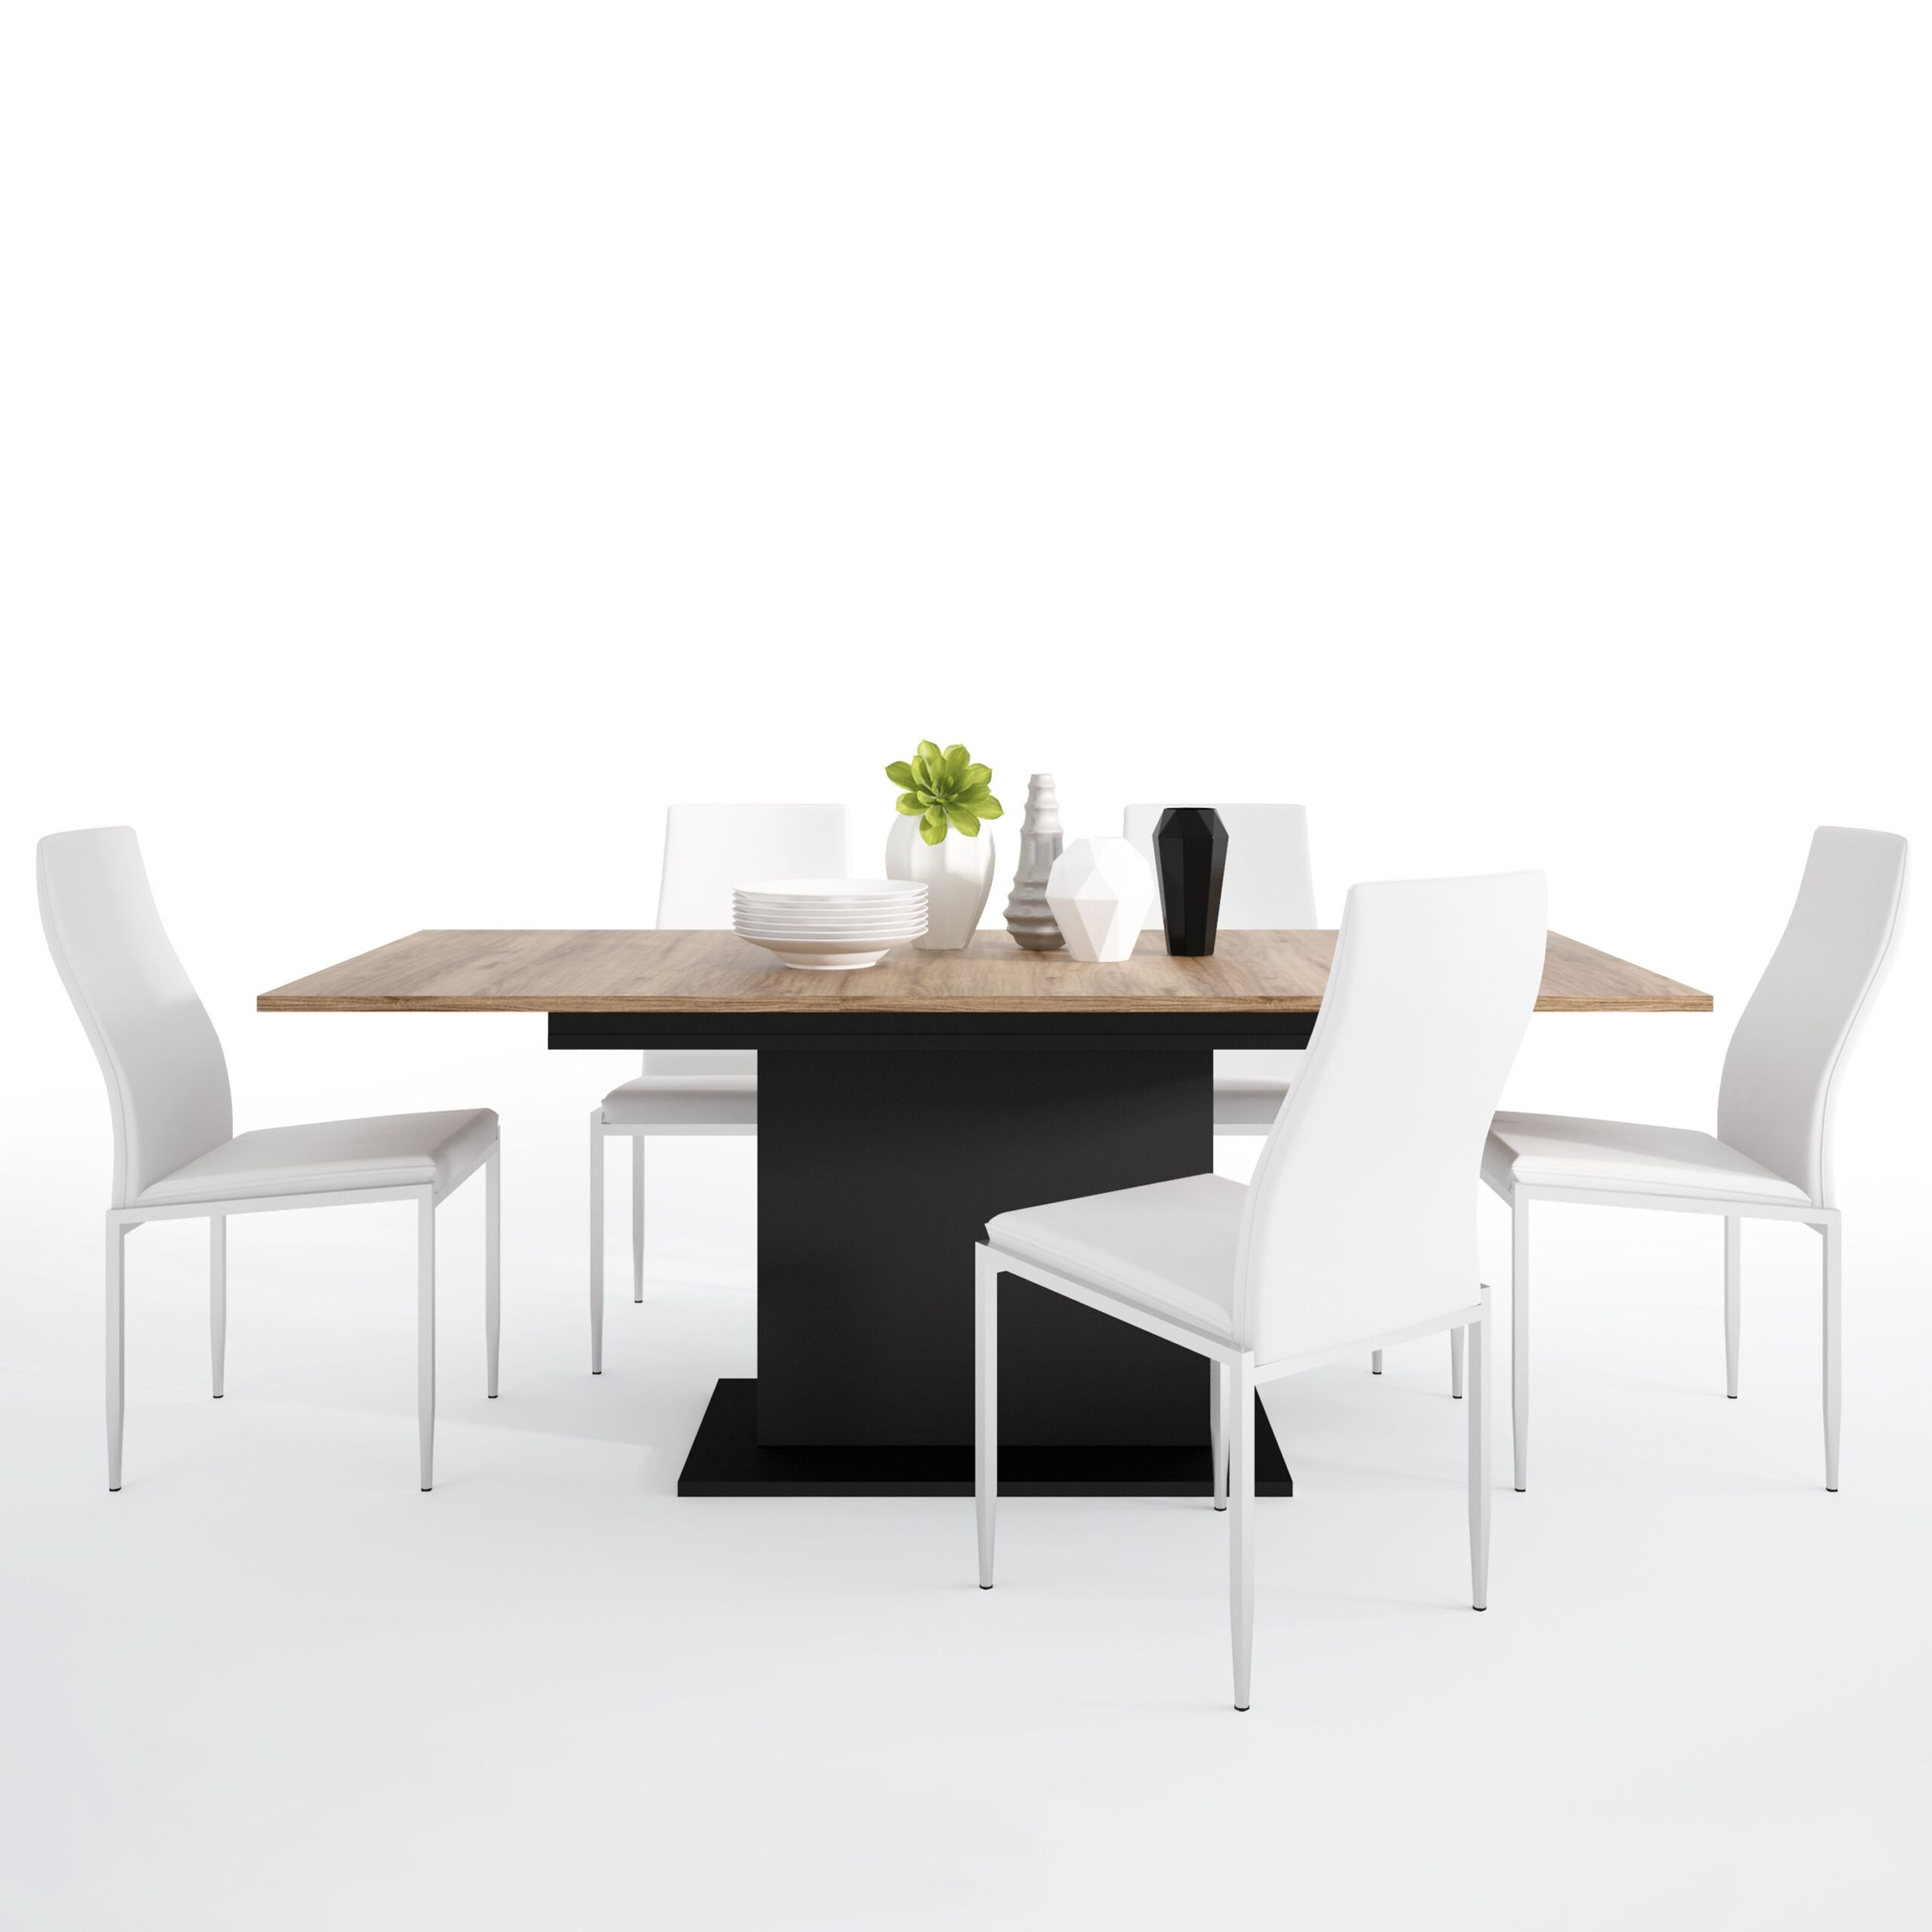 Yolo Set Yolo Extending Table 4 Lillie High Chair White.